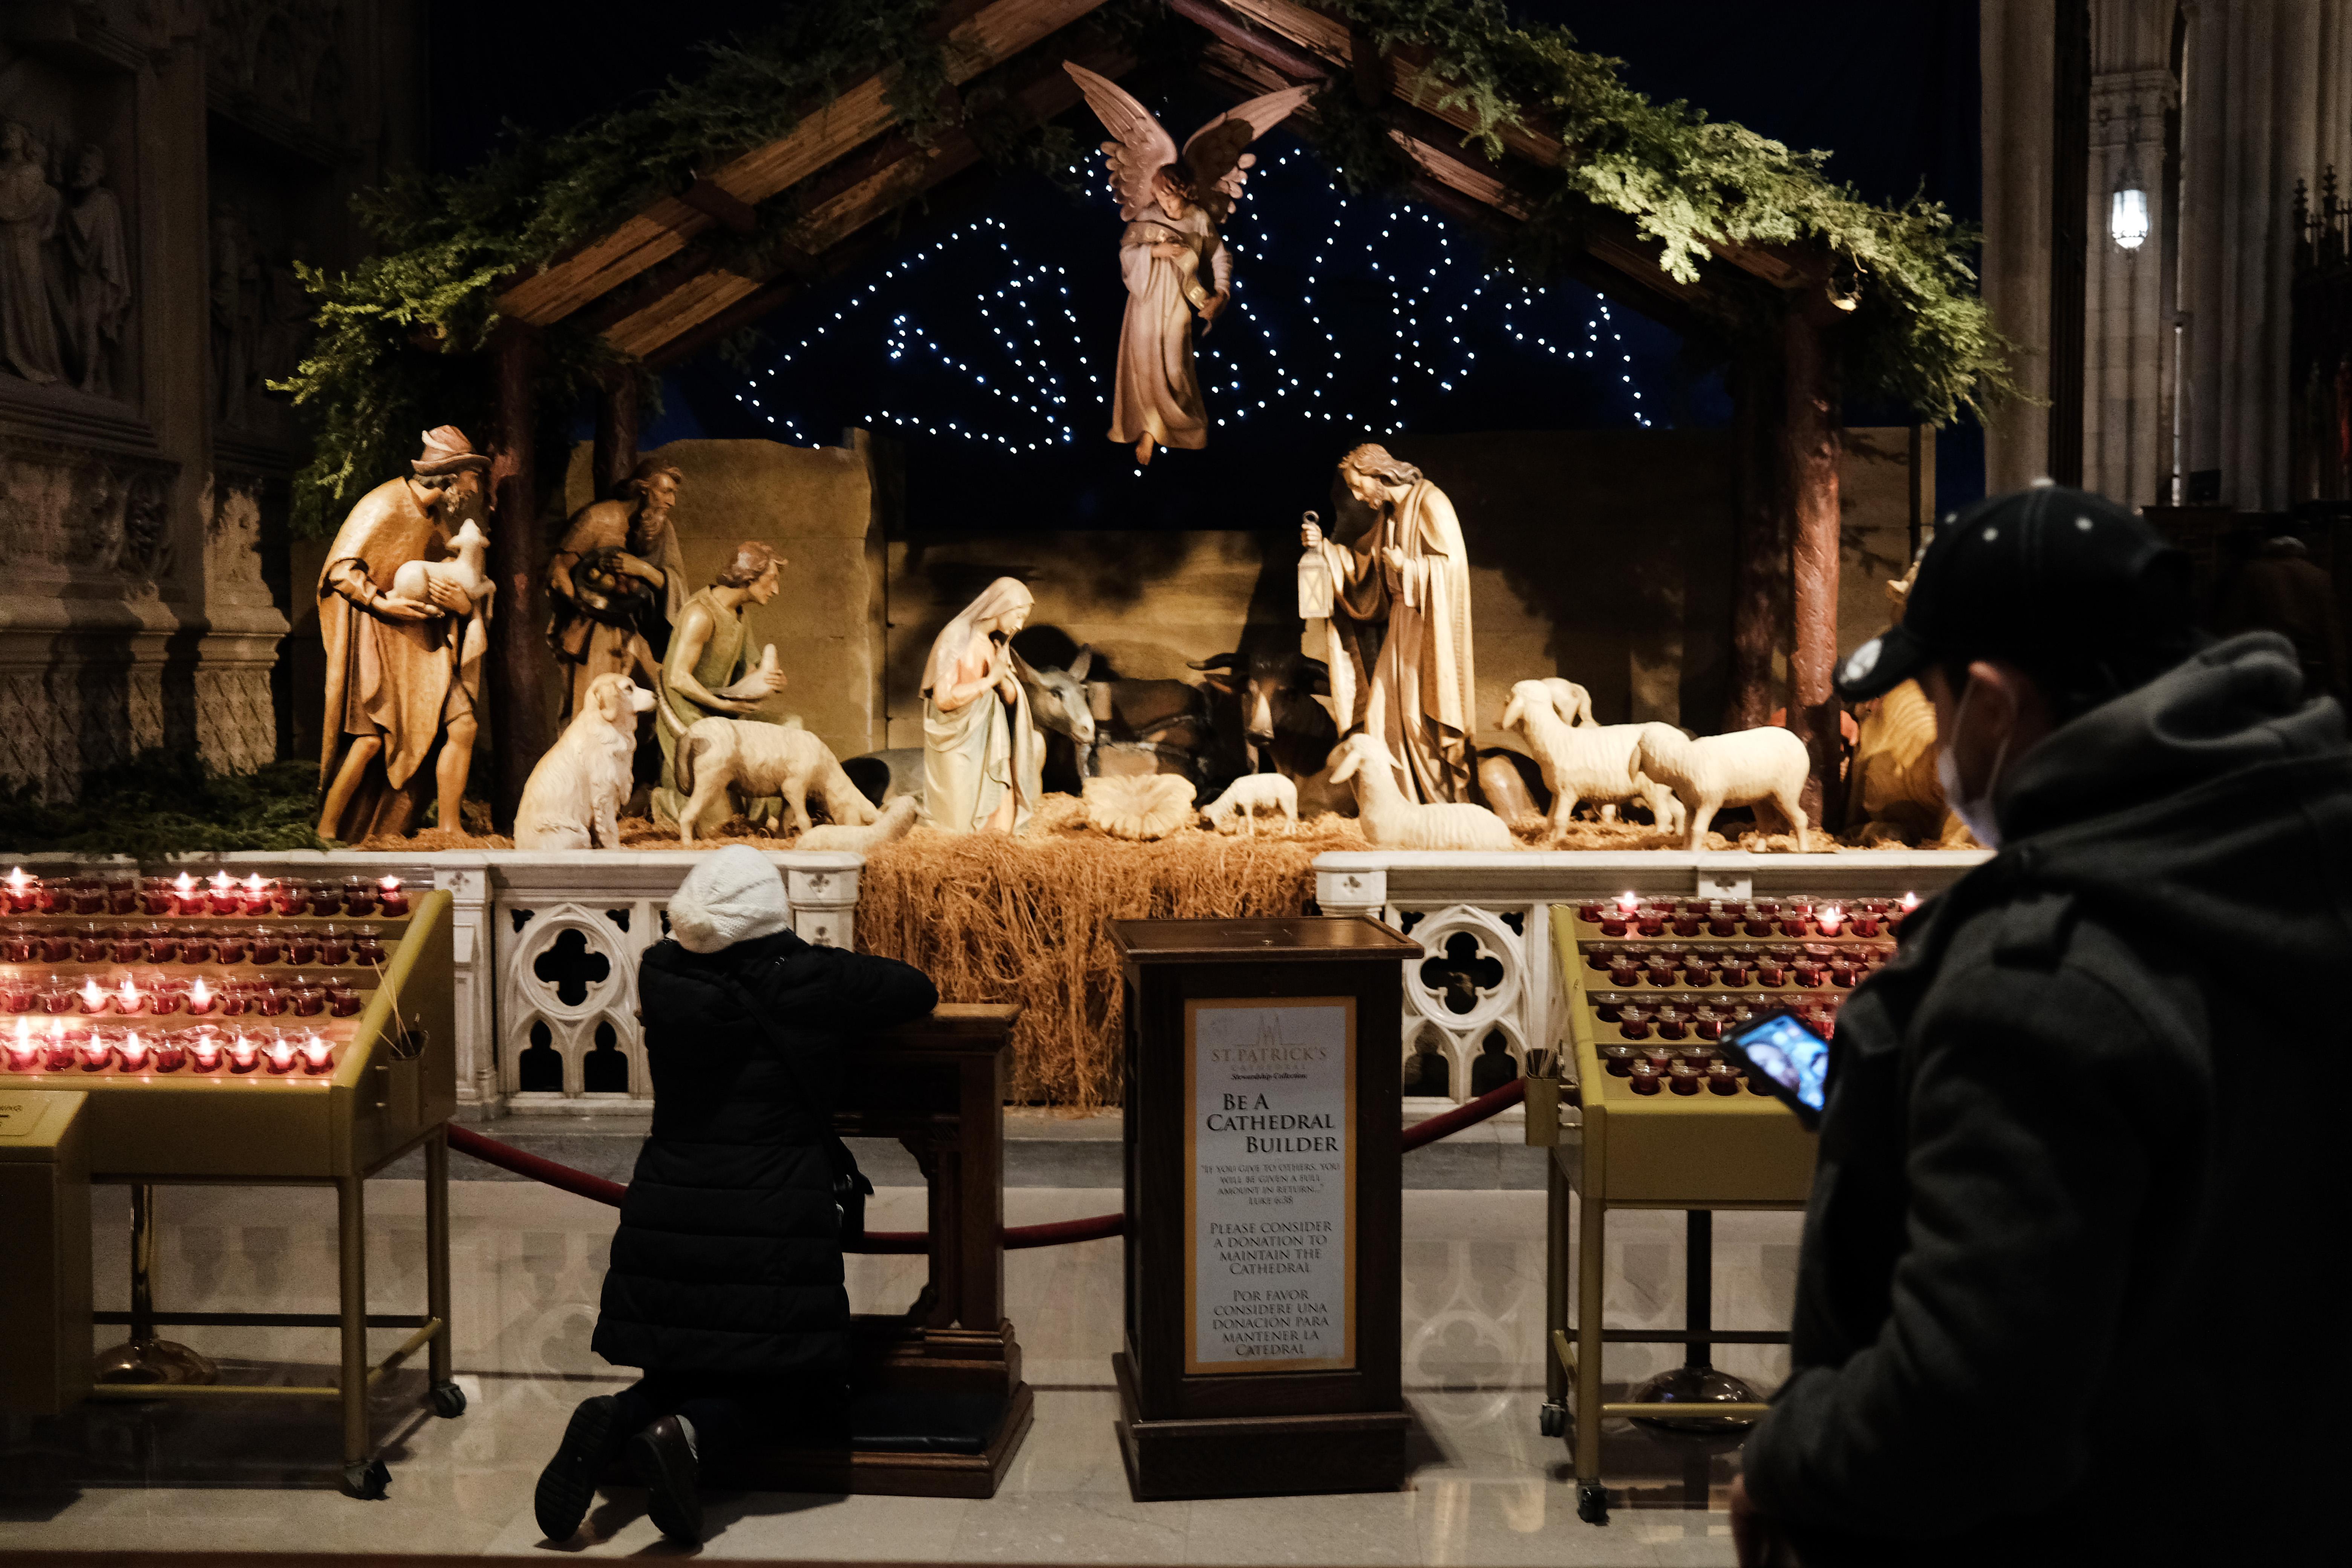 A person kneels in front of a Nativity scene at St. Patrick's Cathedral in New York. Behind her a person wearing a mask stands looking at their phone.